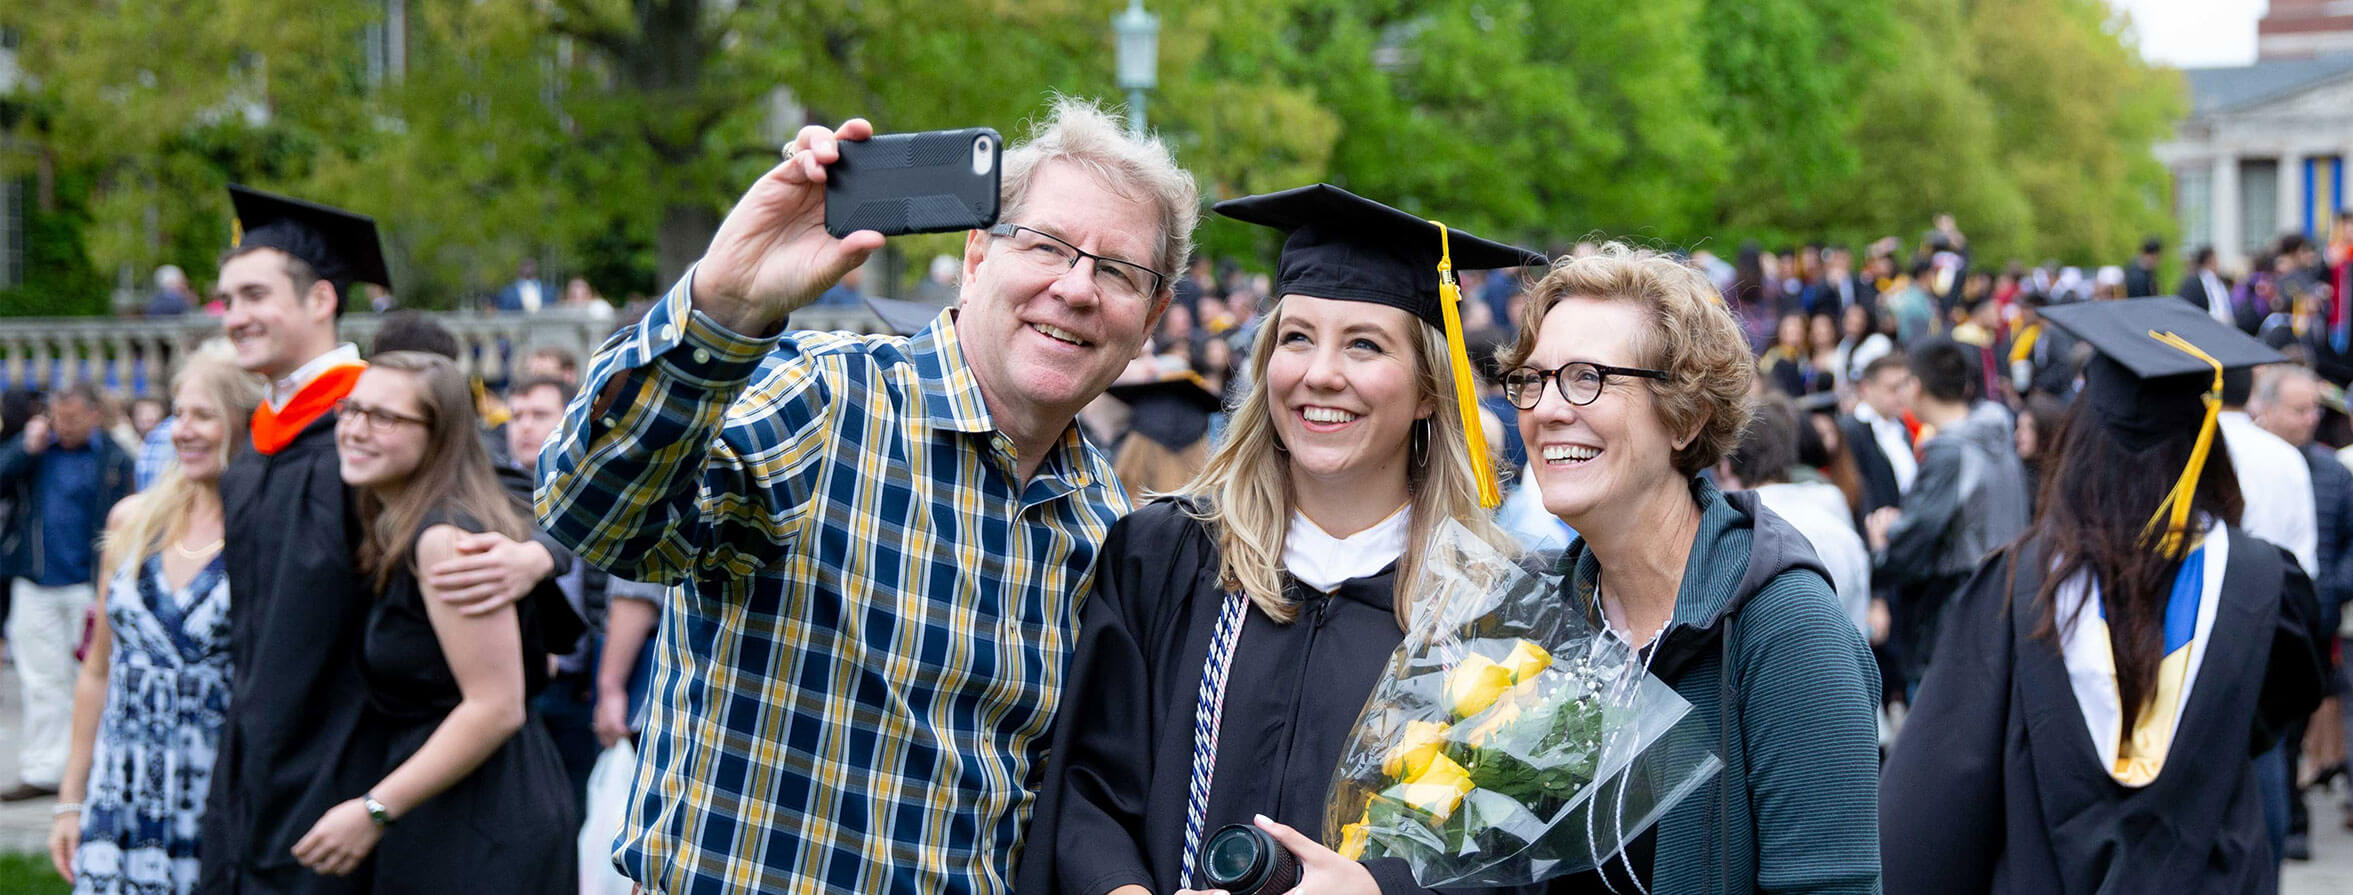 Student poses for photo with their relatives at University of Rochester